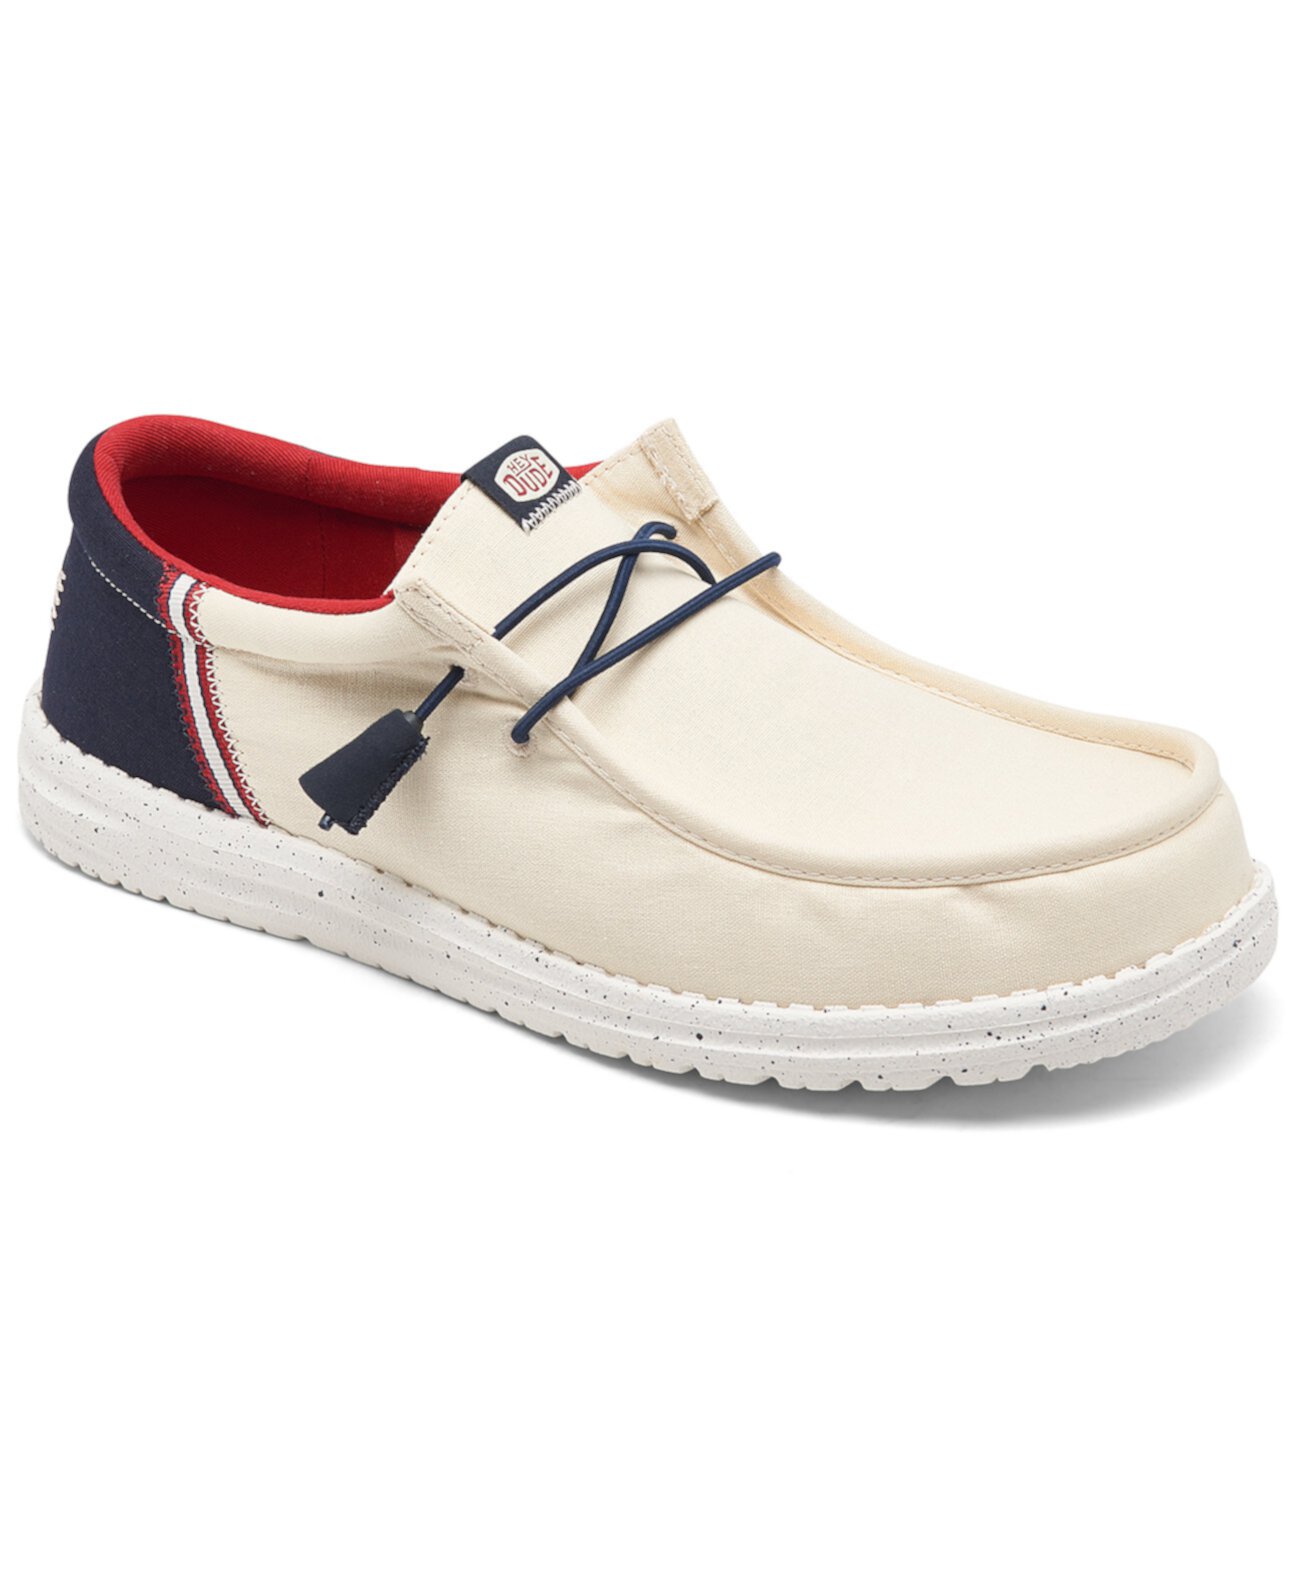 Men's Wally Funk Americana Casual Moccasin Sneakers from Finish Line Hey Dude